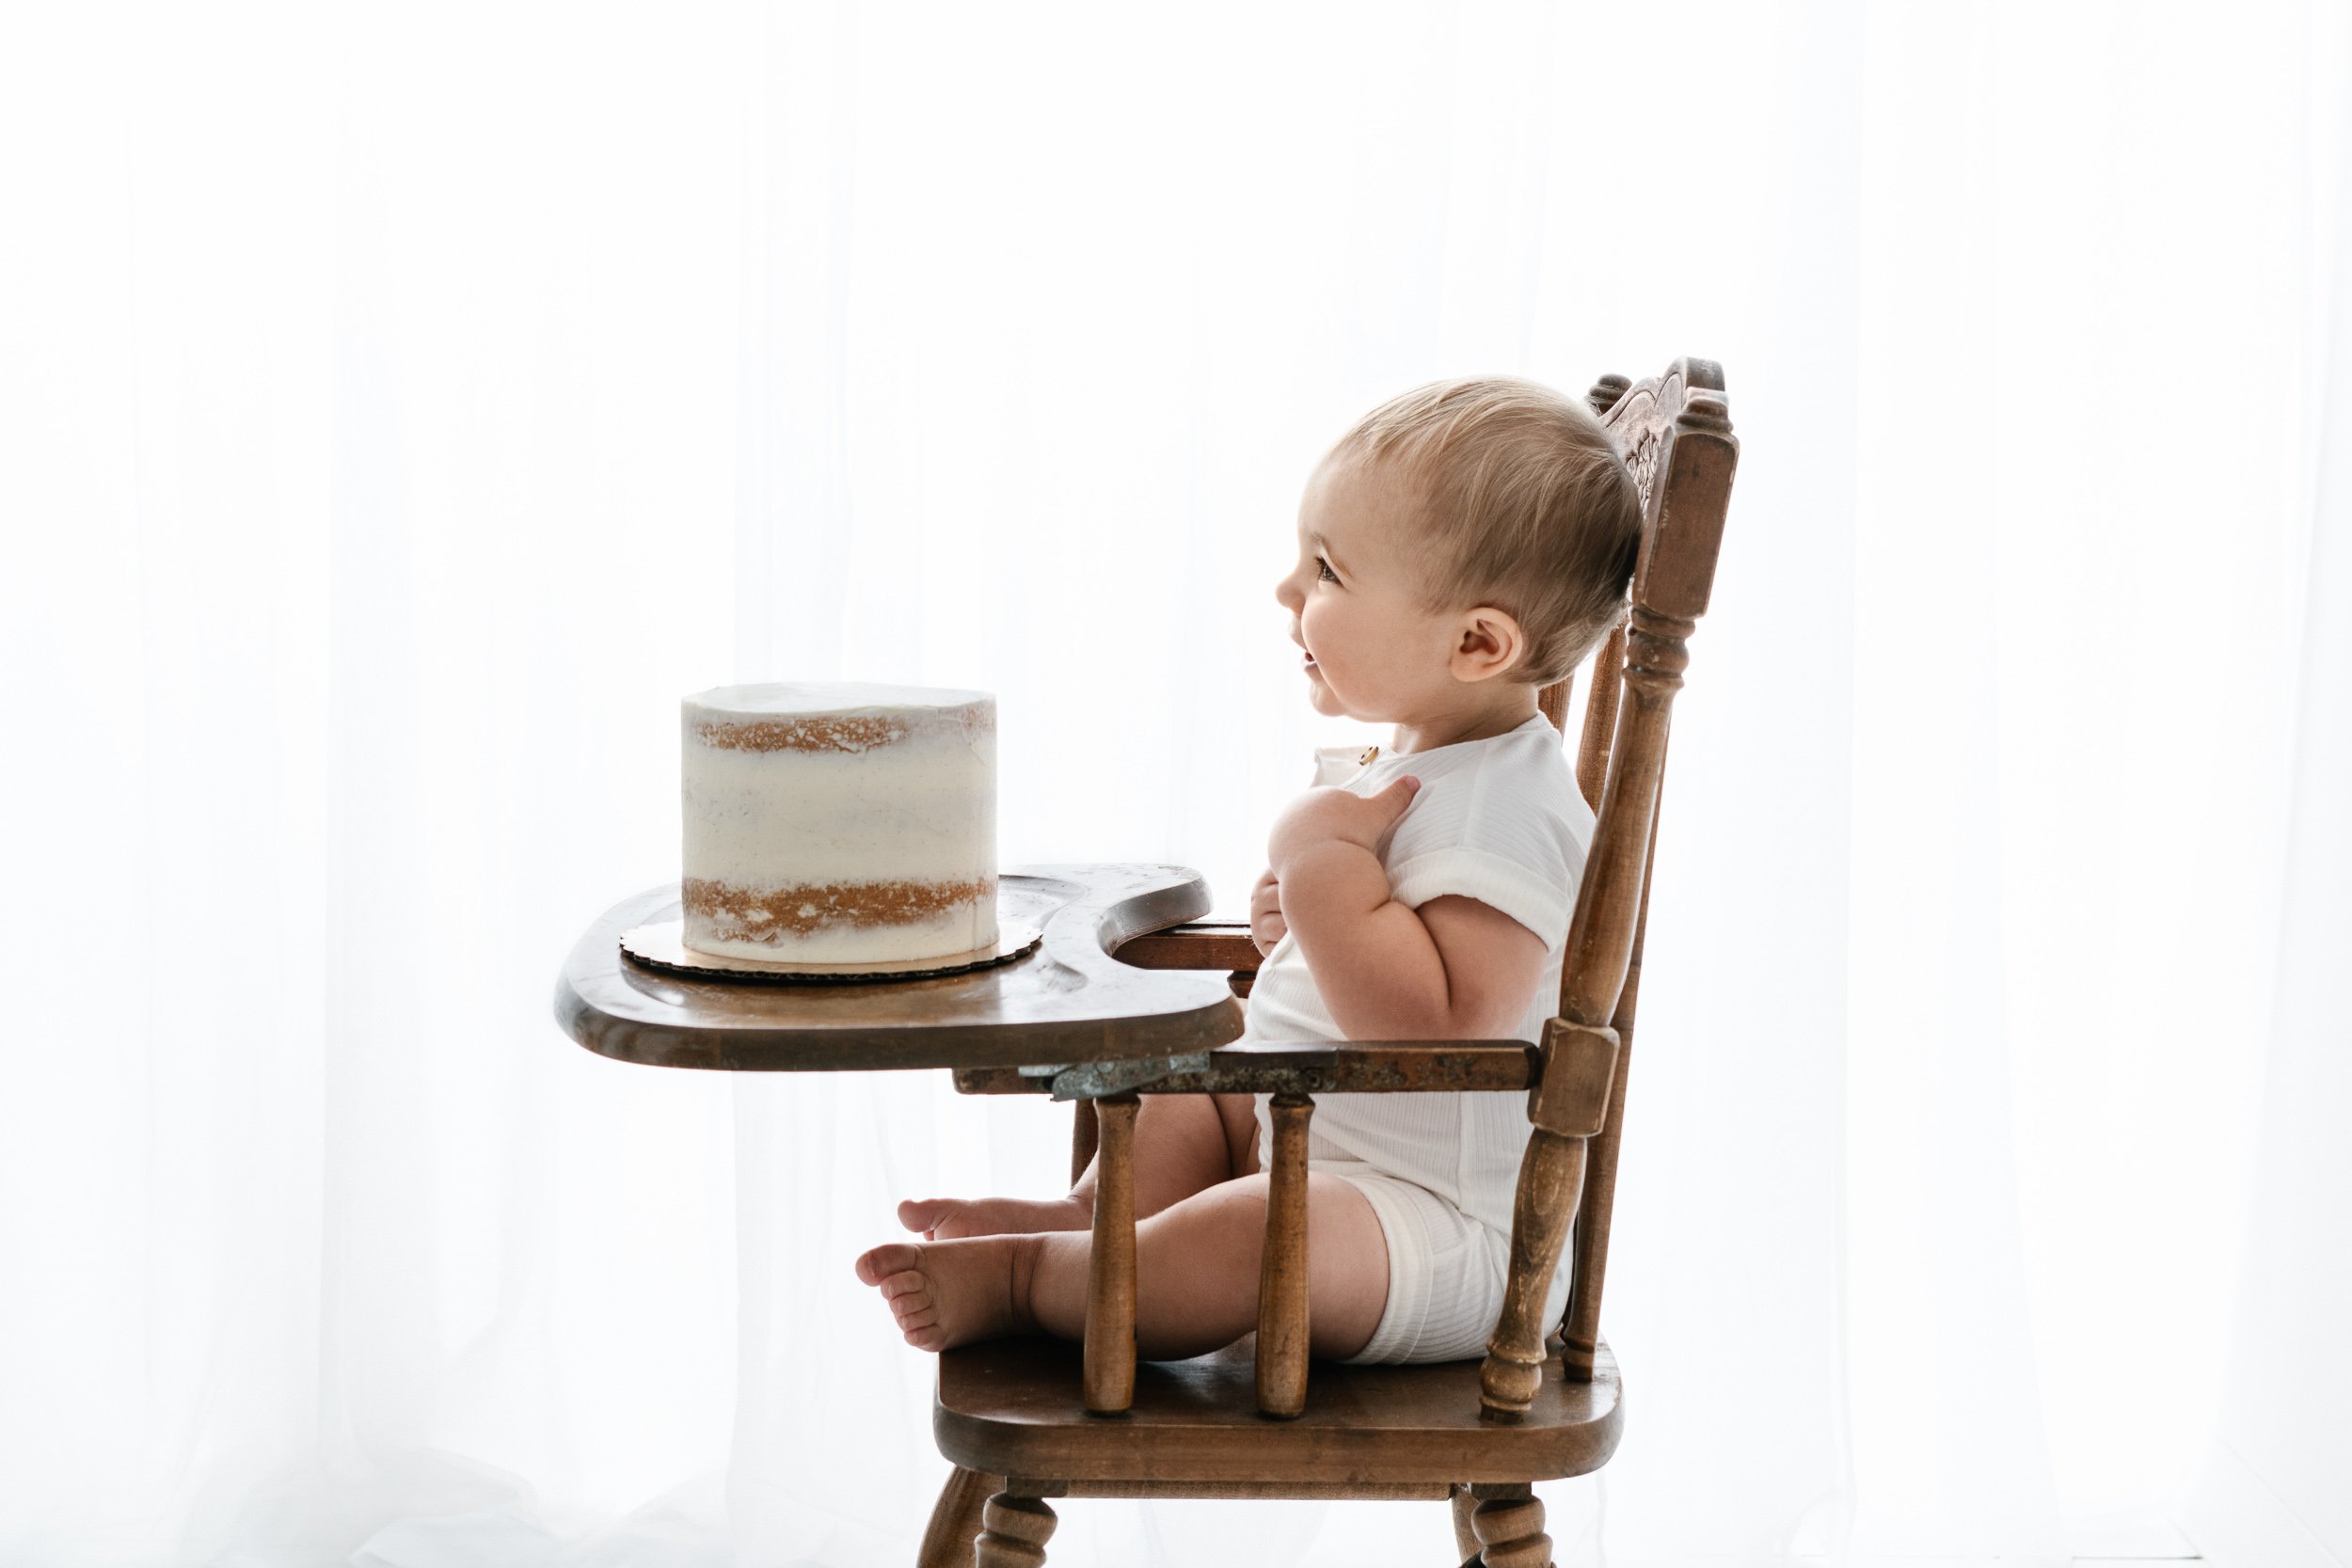  Portrait of a baby in a high chair during his birthday session with Nicole Hawkins Photography. high chair cake #NicoleHawkinsPhotography #NicoleHawkinsBabies #BirthdayStudioPhotography #smashcake #firstbirthday #studiobabiesandchildren 